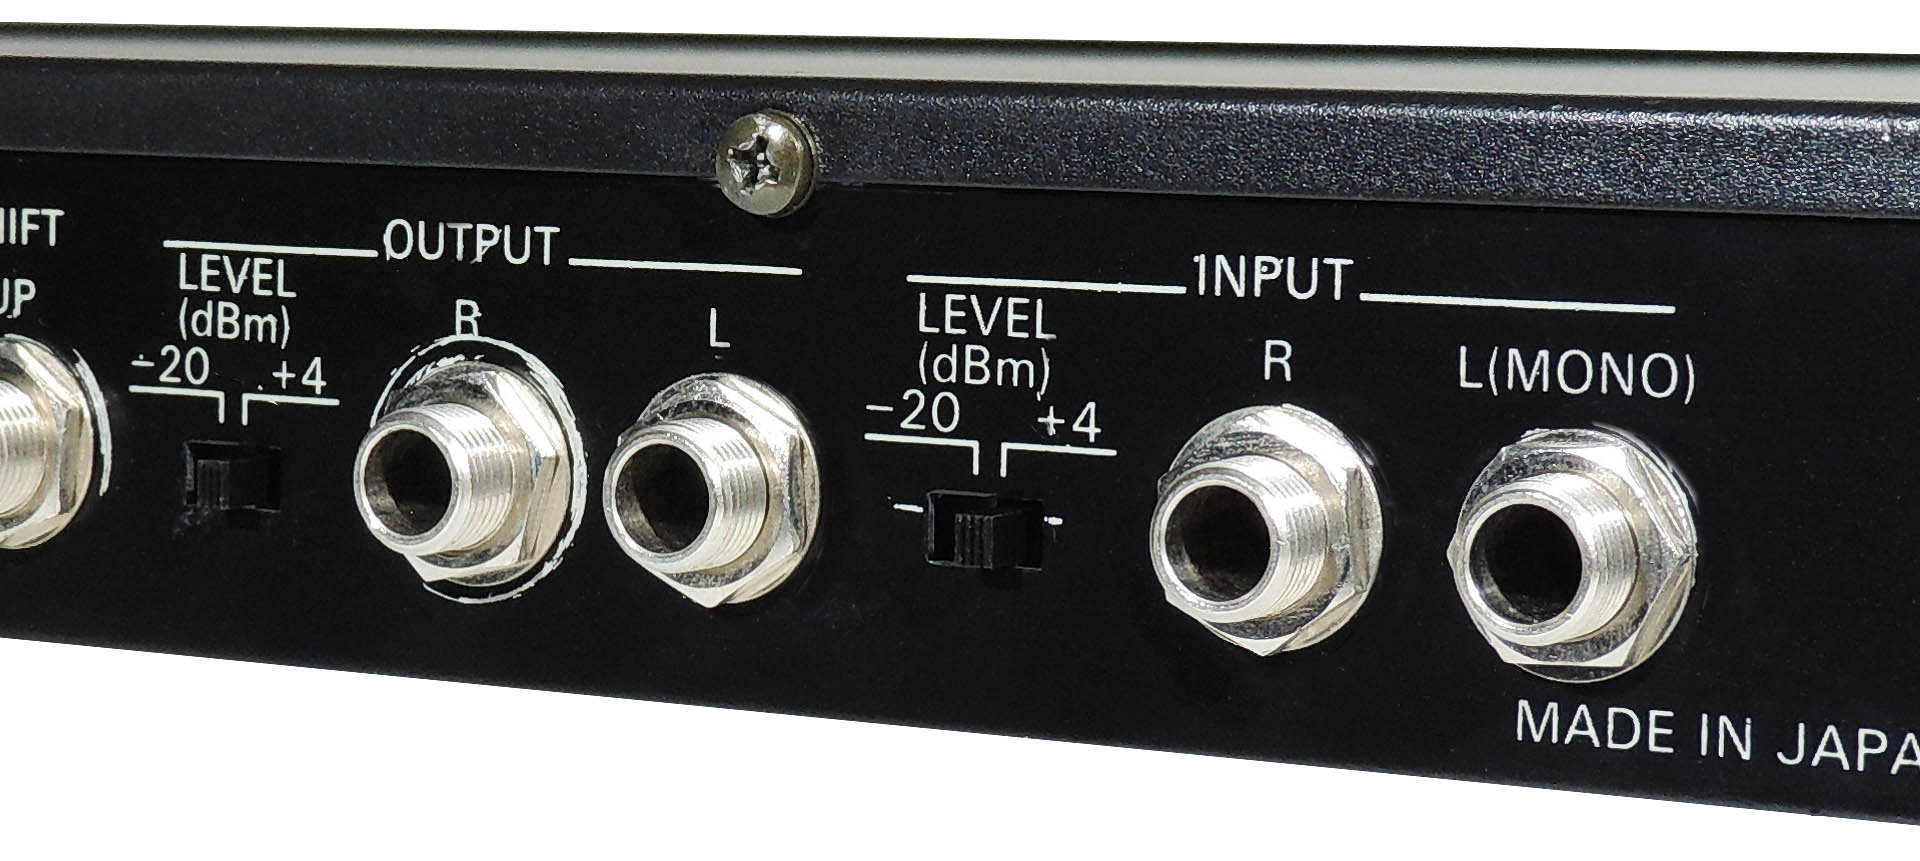 Rear of Roland RSP-550 showing level selector switches